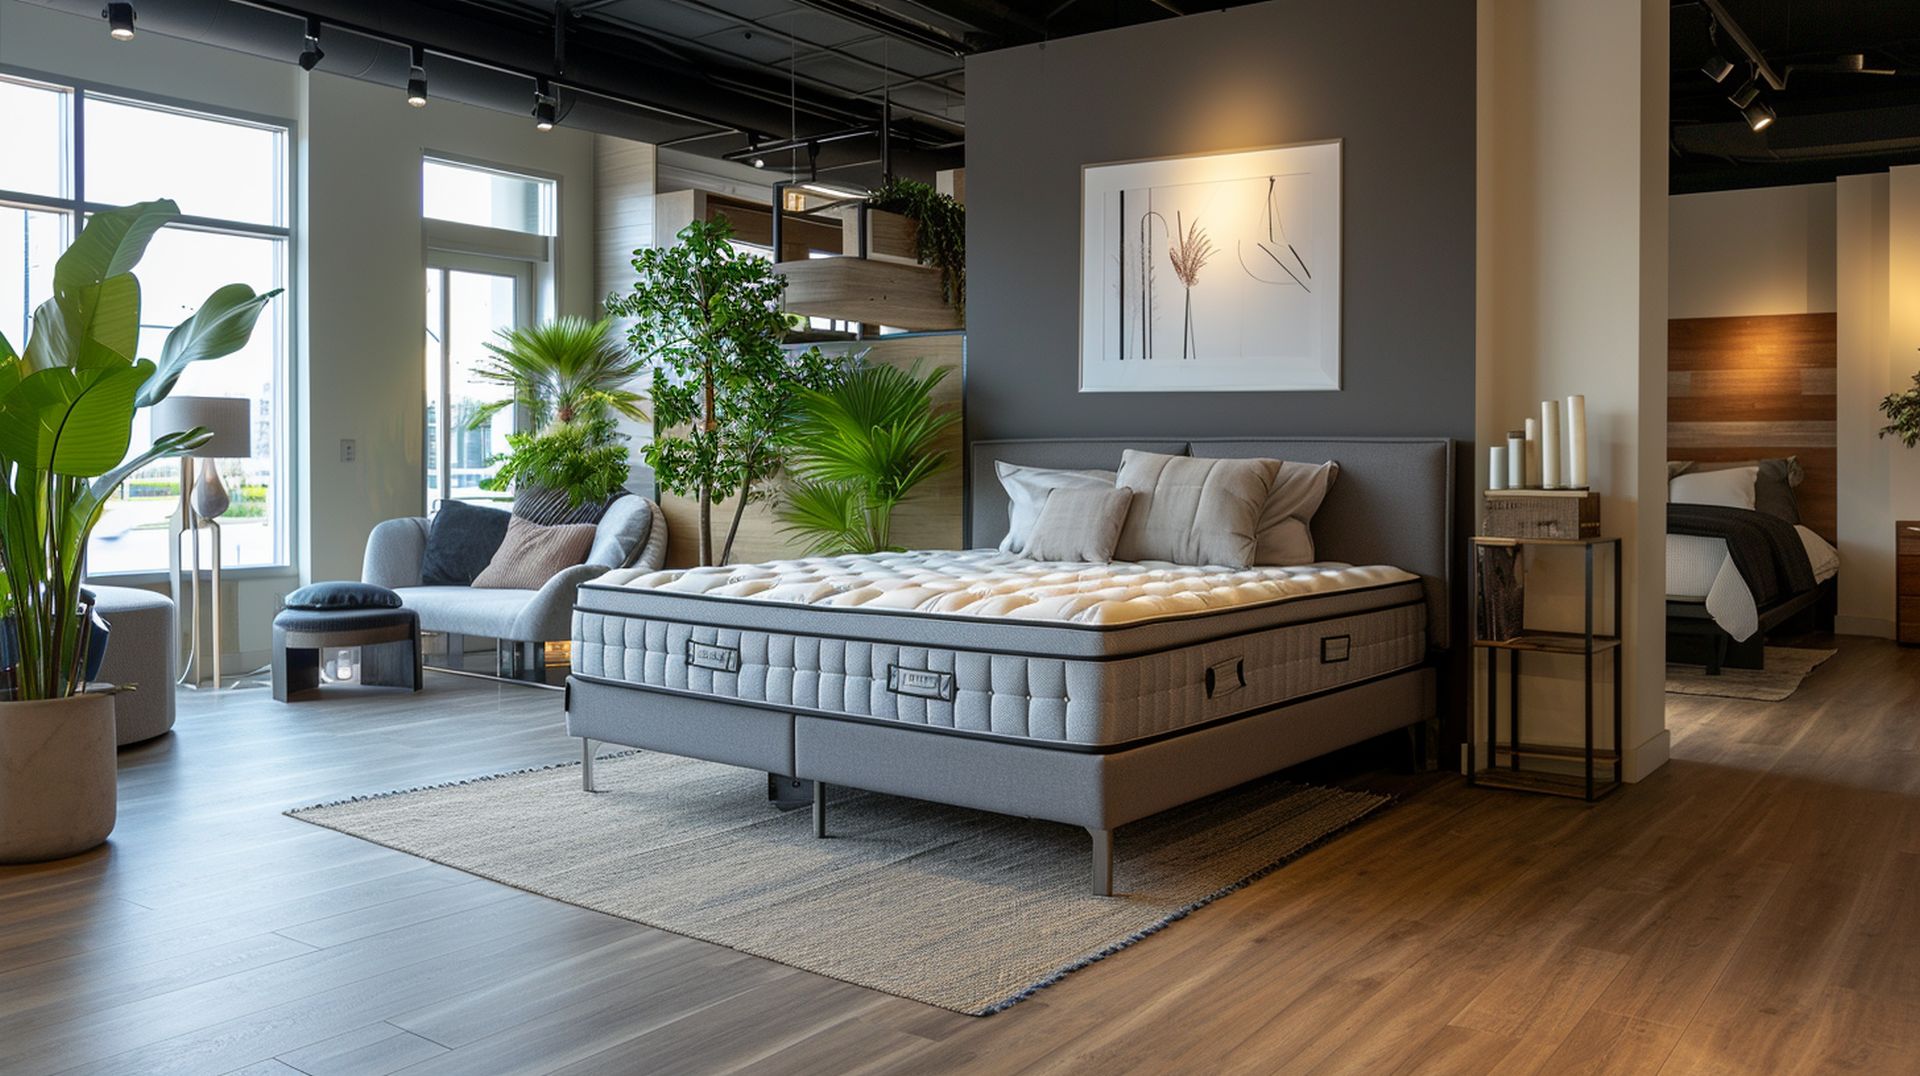 If you're looking for a new bed, mattress stores in Hayward offer the best customer and delivery service, financing, and warranties in California